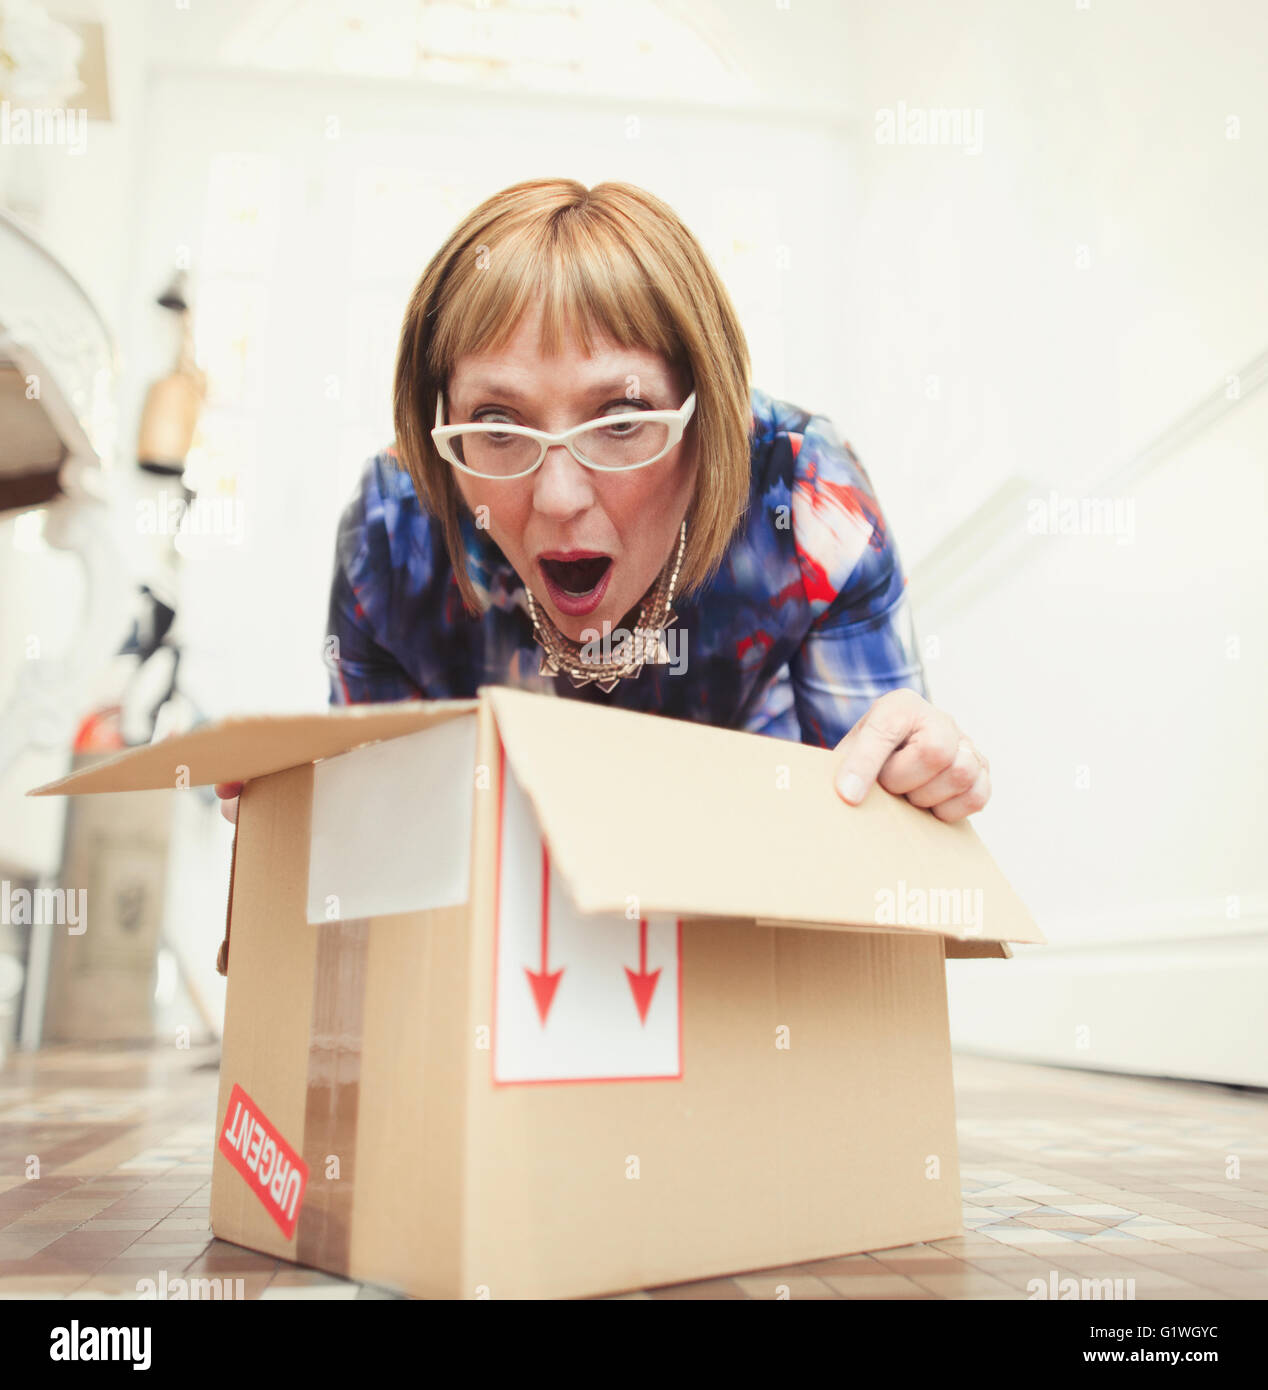 Surprised mature woman opening package on foyer floor Stock Photo